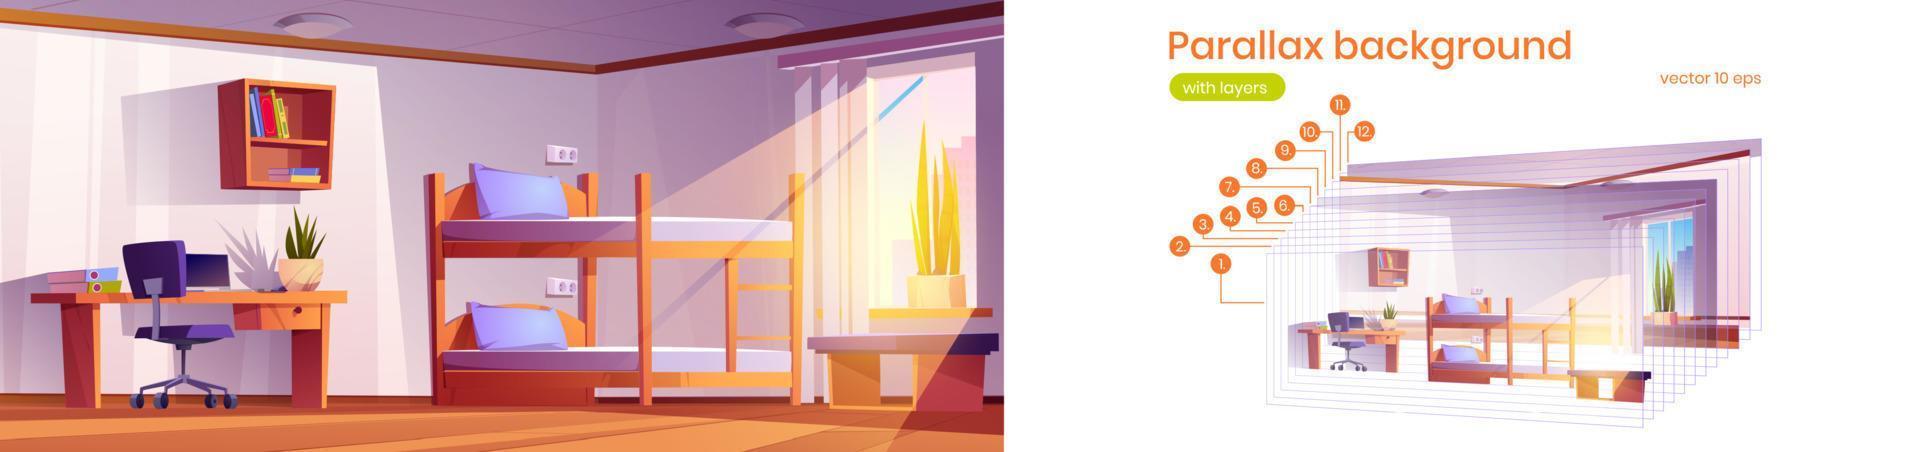 Parallax background student dormitory with bunkbed vector